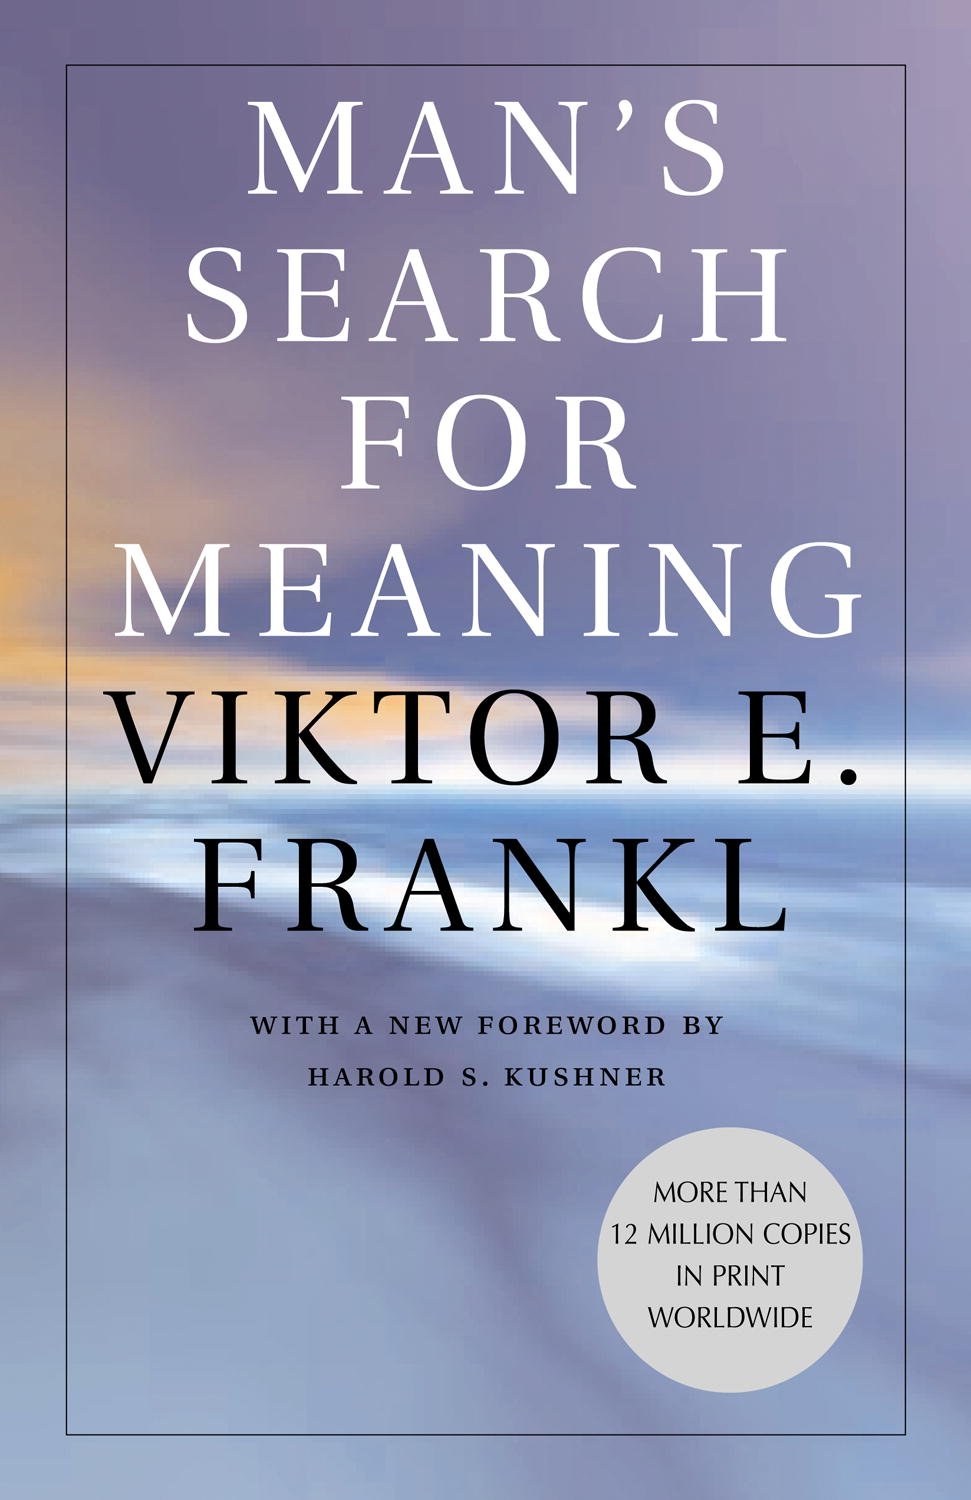 man's search for meaning - book cover